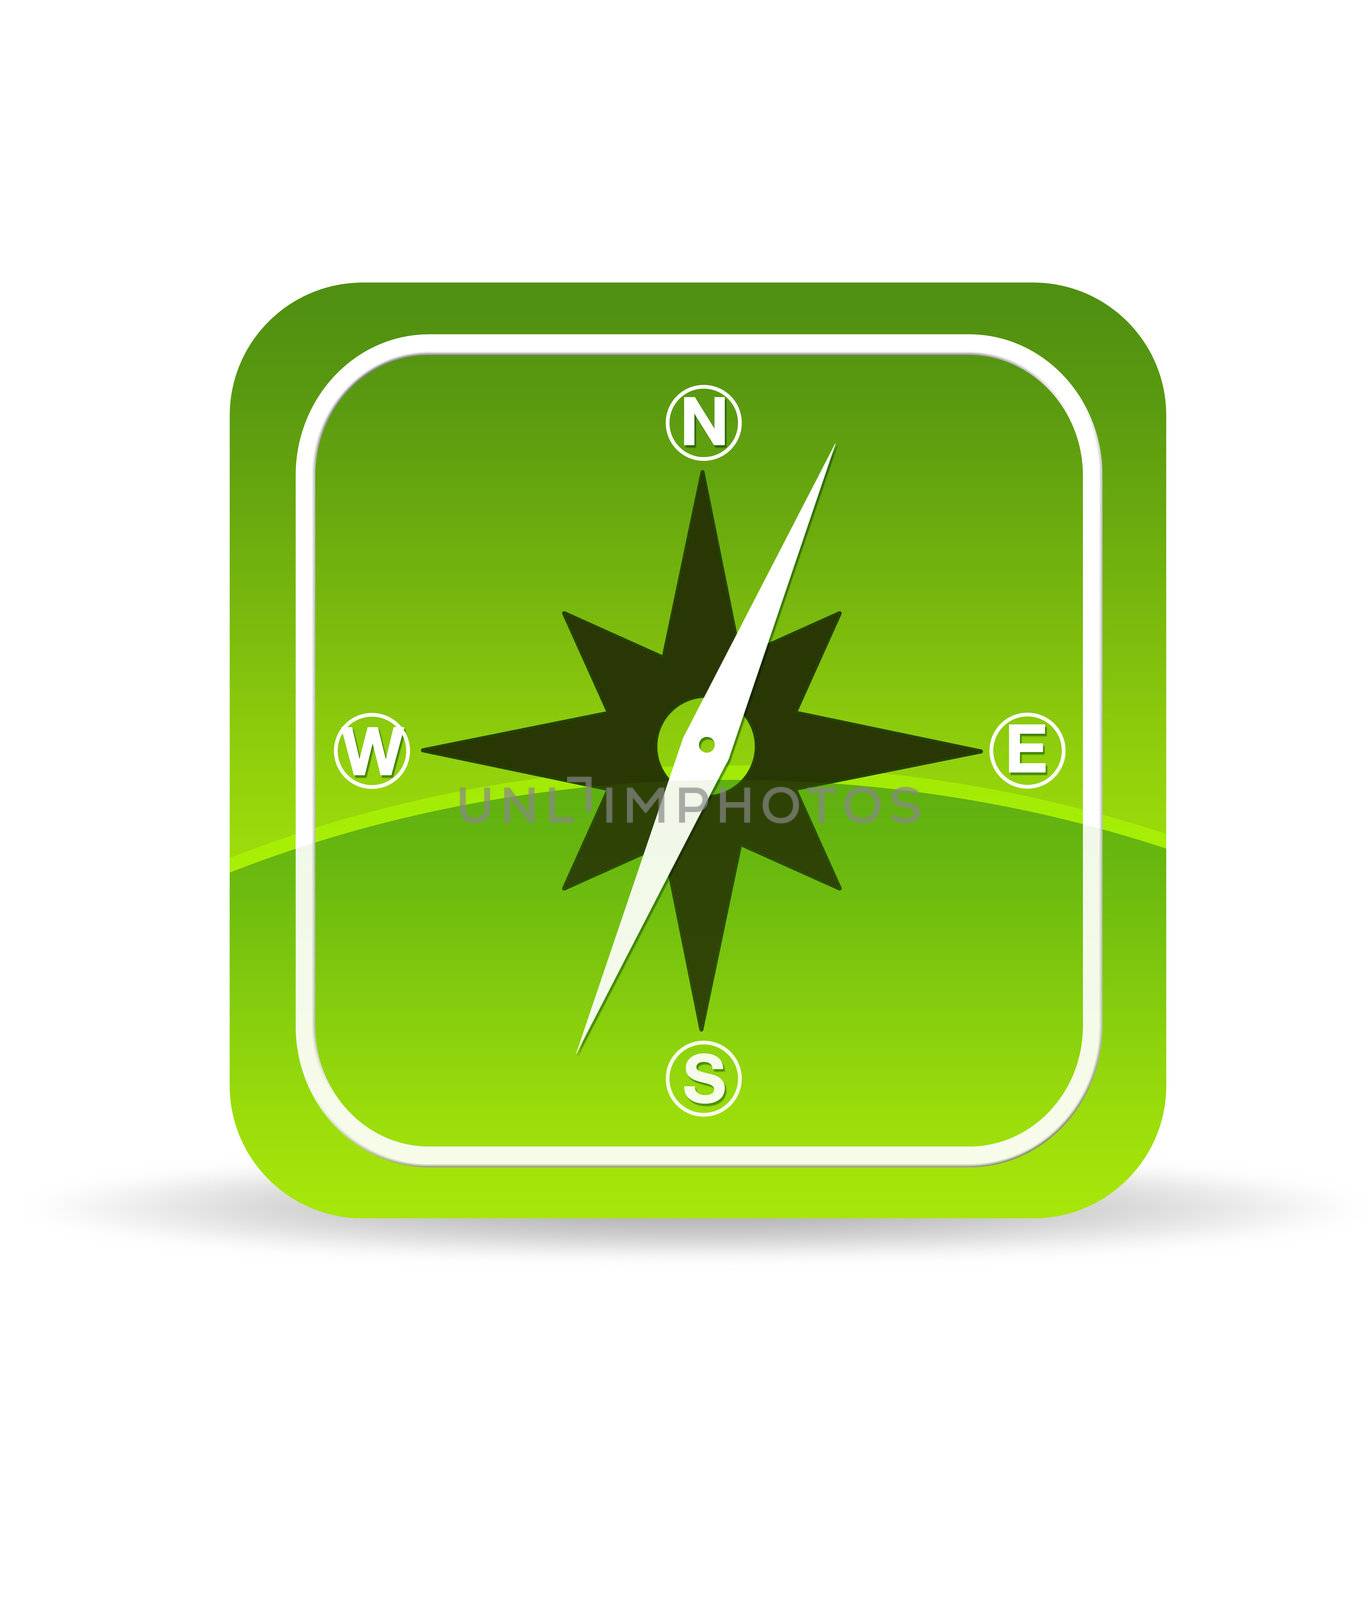 High resolution green compass  icon on white background.